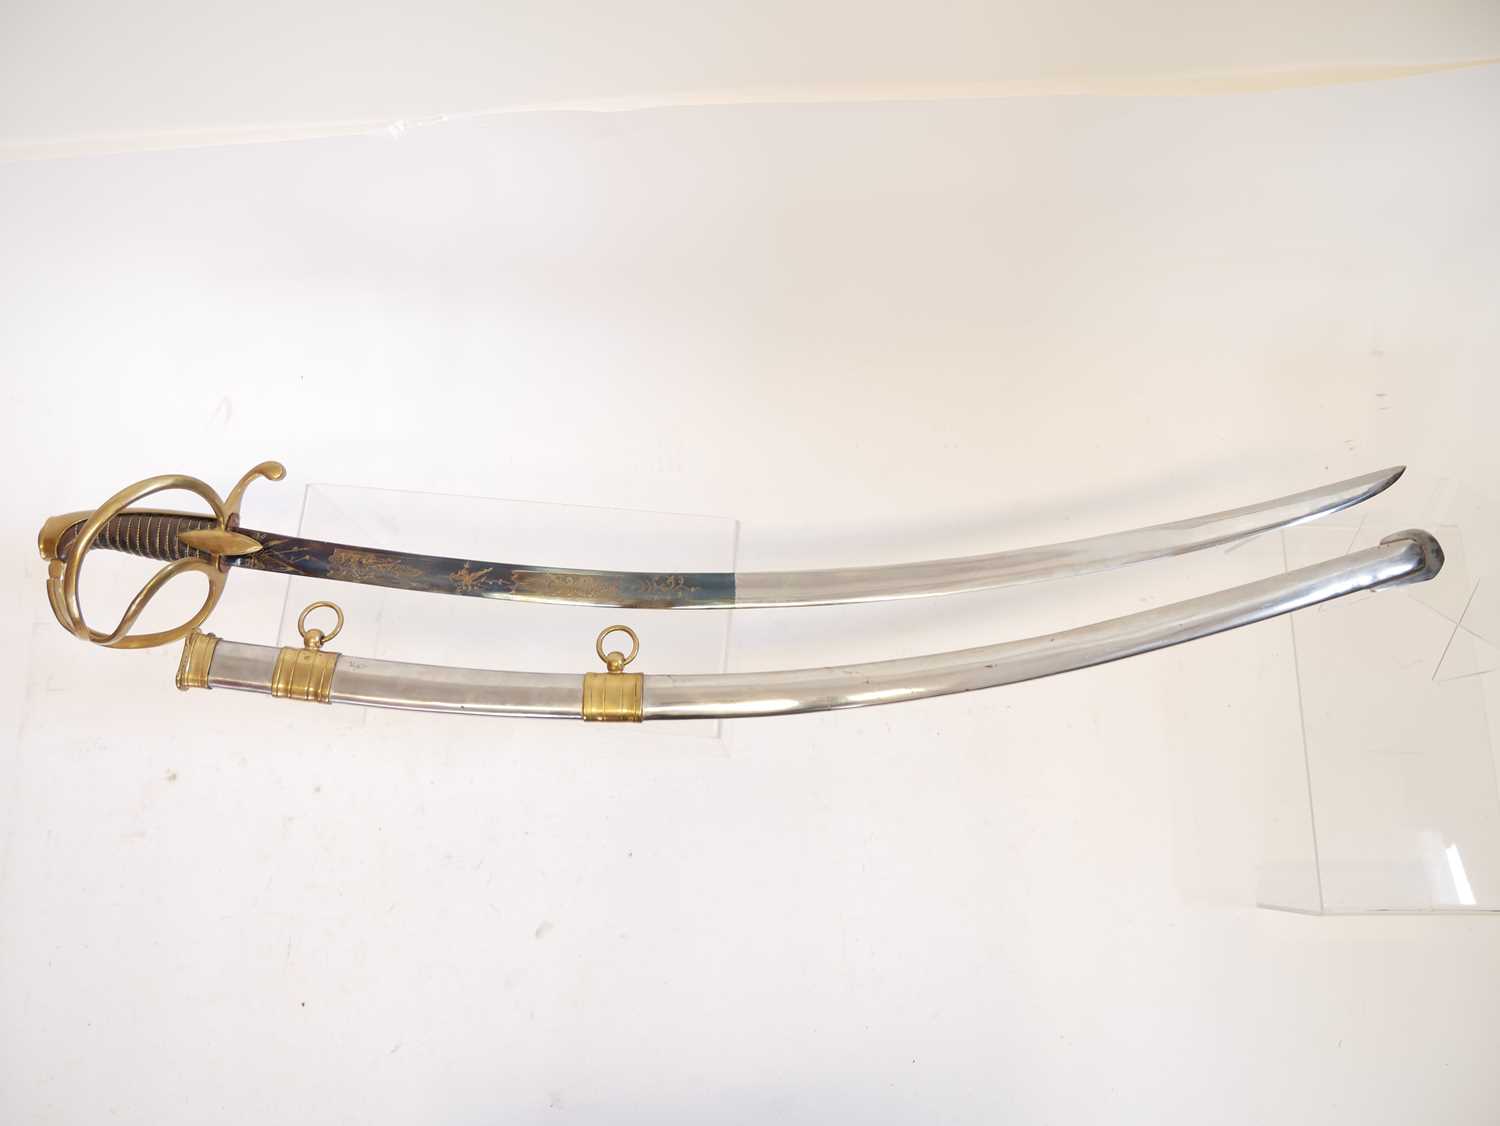 Reproduction copy of a French Cavalry sabre, with blue and gilt etched blade. Buyer must be over the - Image 2 of 7